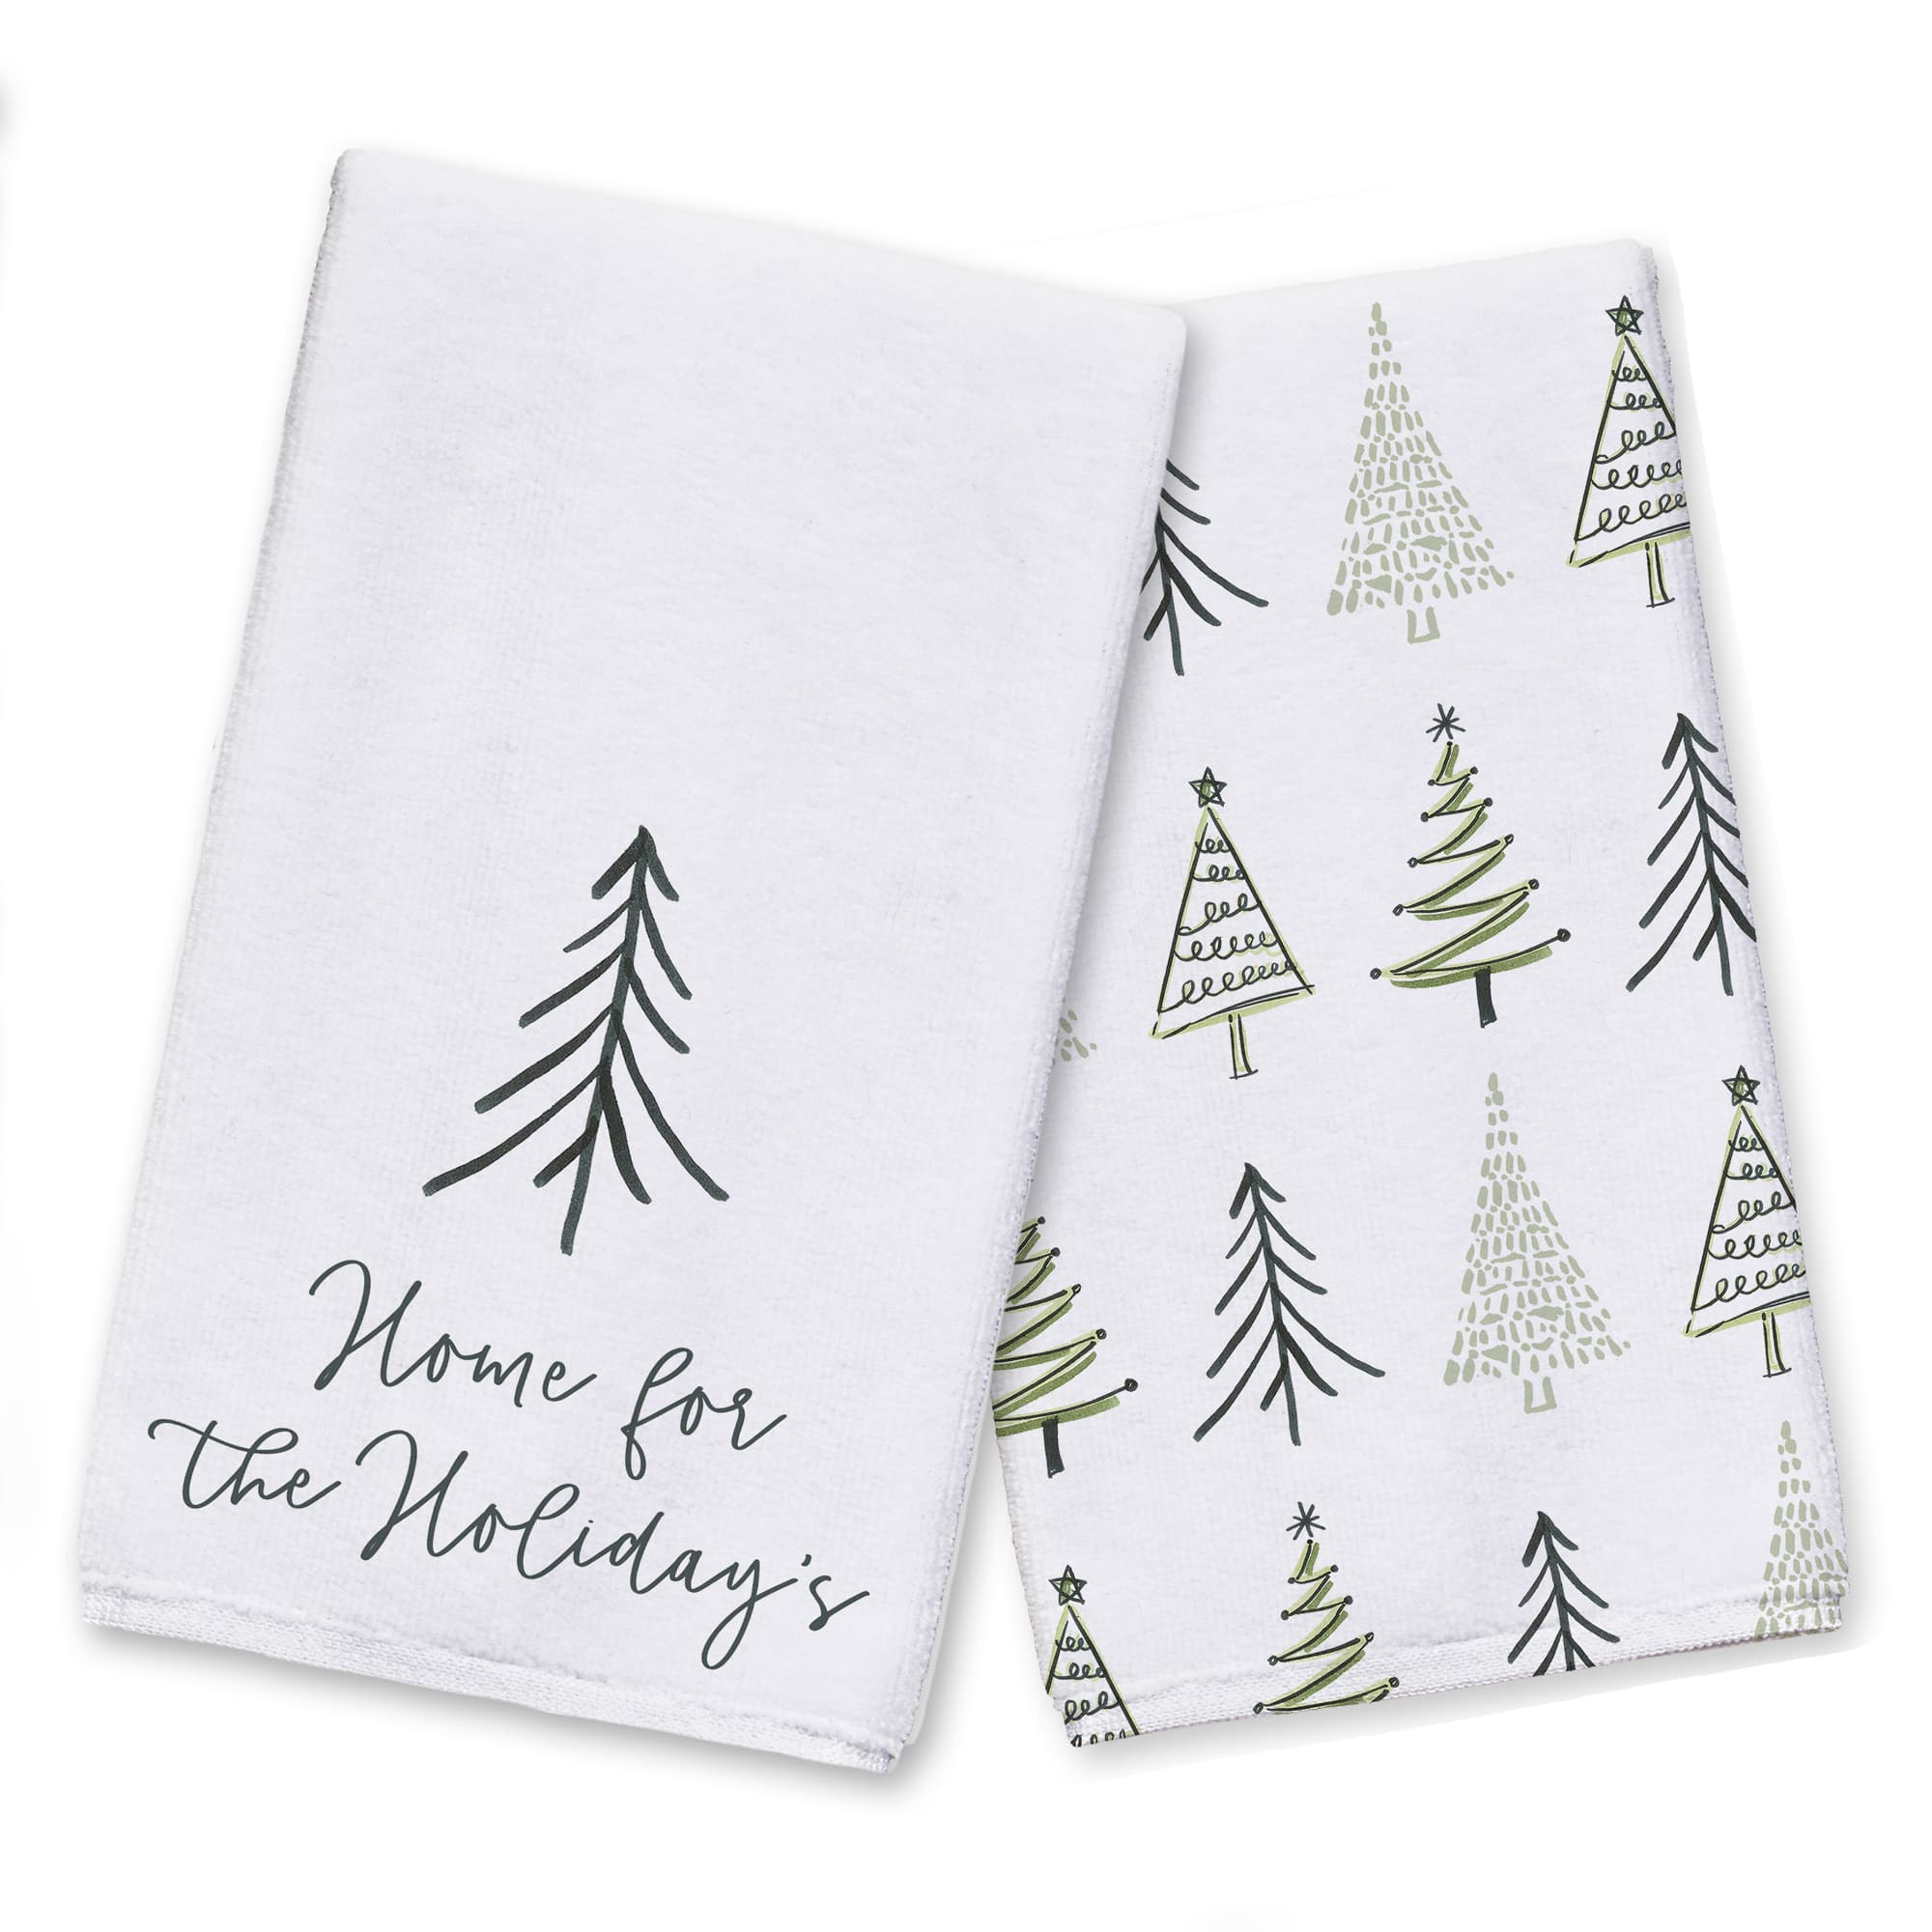 Home For the Holidays Trees Tea Towels - Set of 2